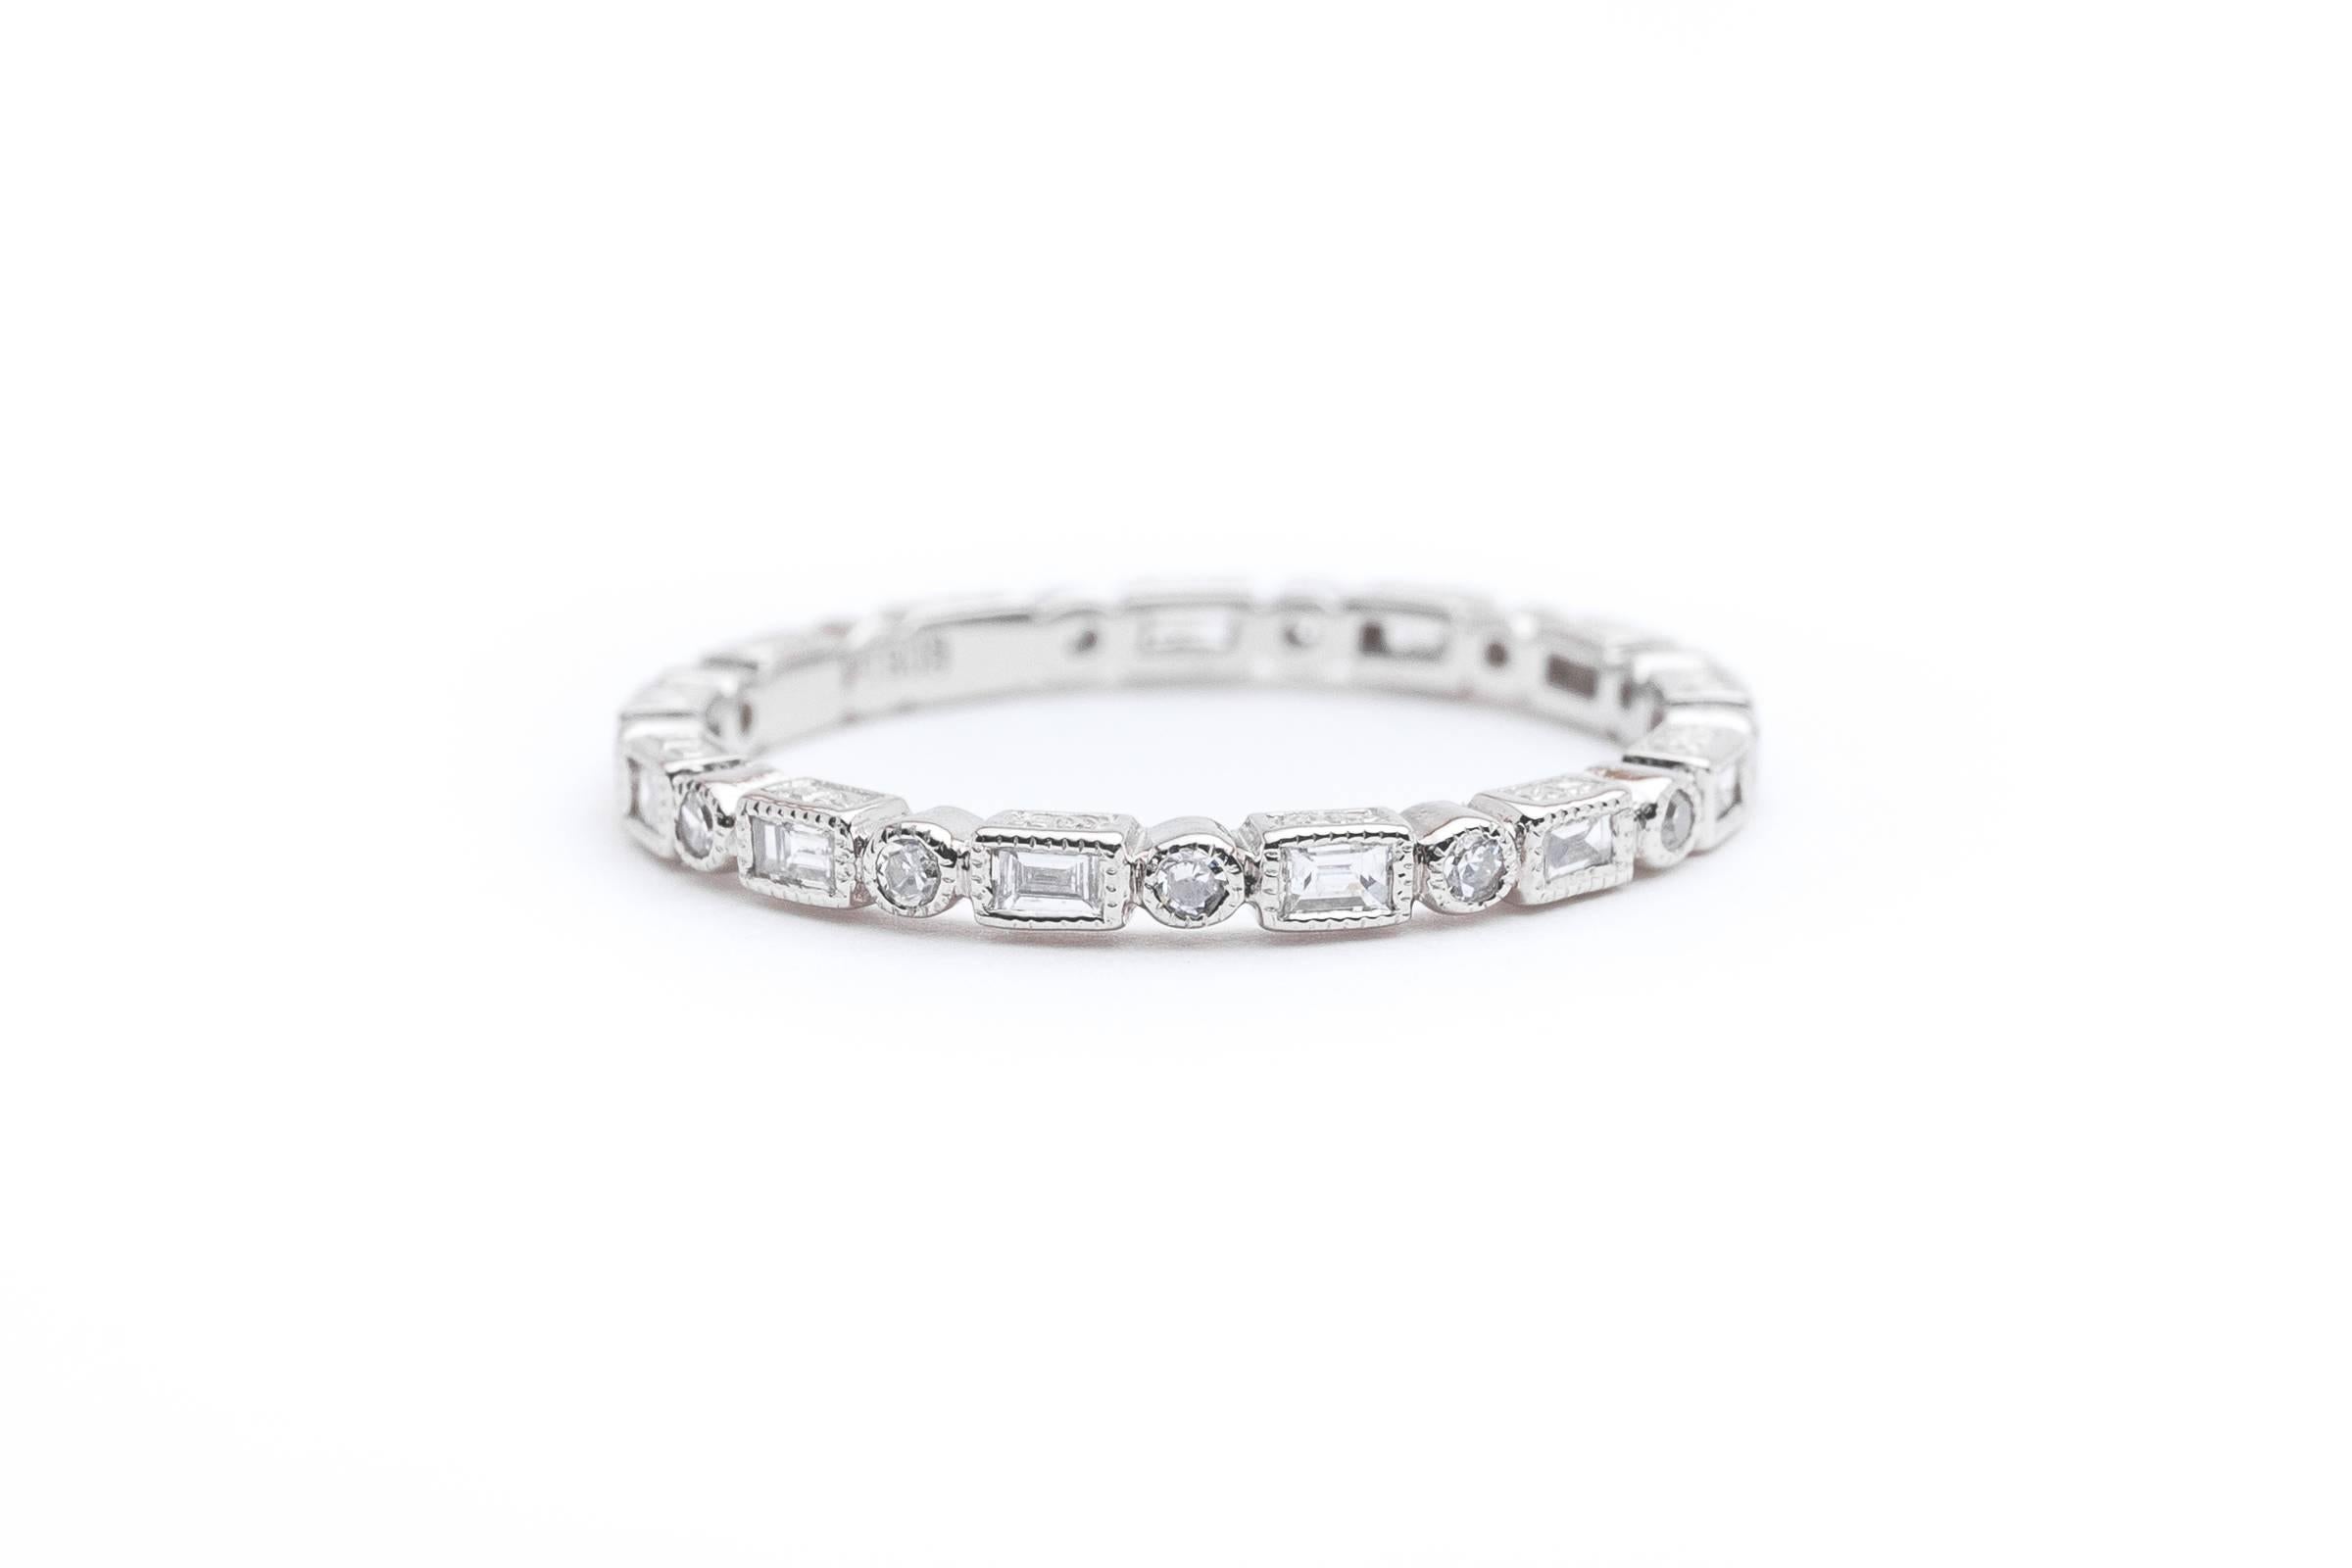 Beacon Hill Jewelers Presents:

A beautiful platinum baguette, and round diamond eternity band. Set with thirteen baguette, and thirteen round diamonds, this beautiful eternity band also features hand engraving work on the sides.

Weighing a